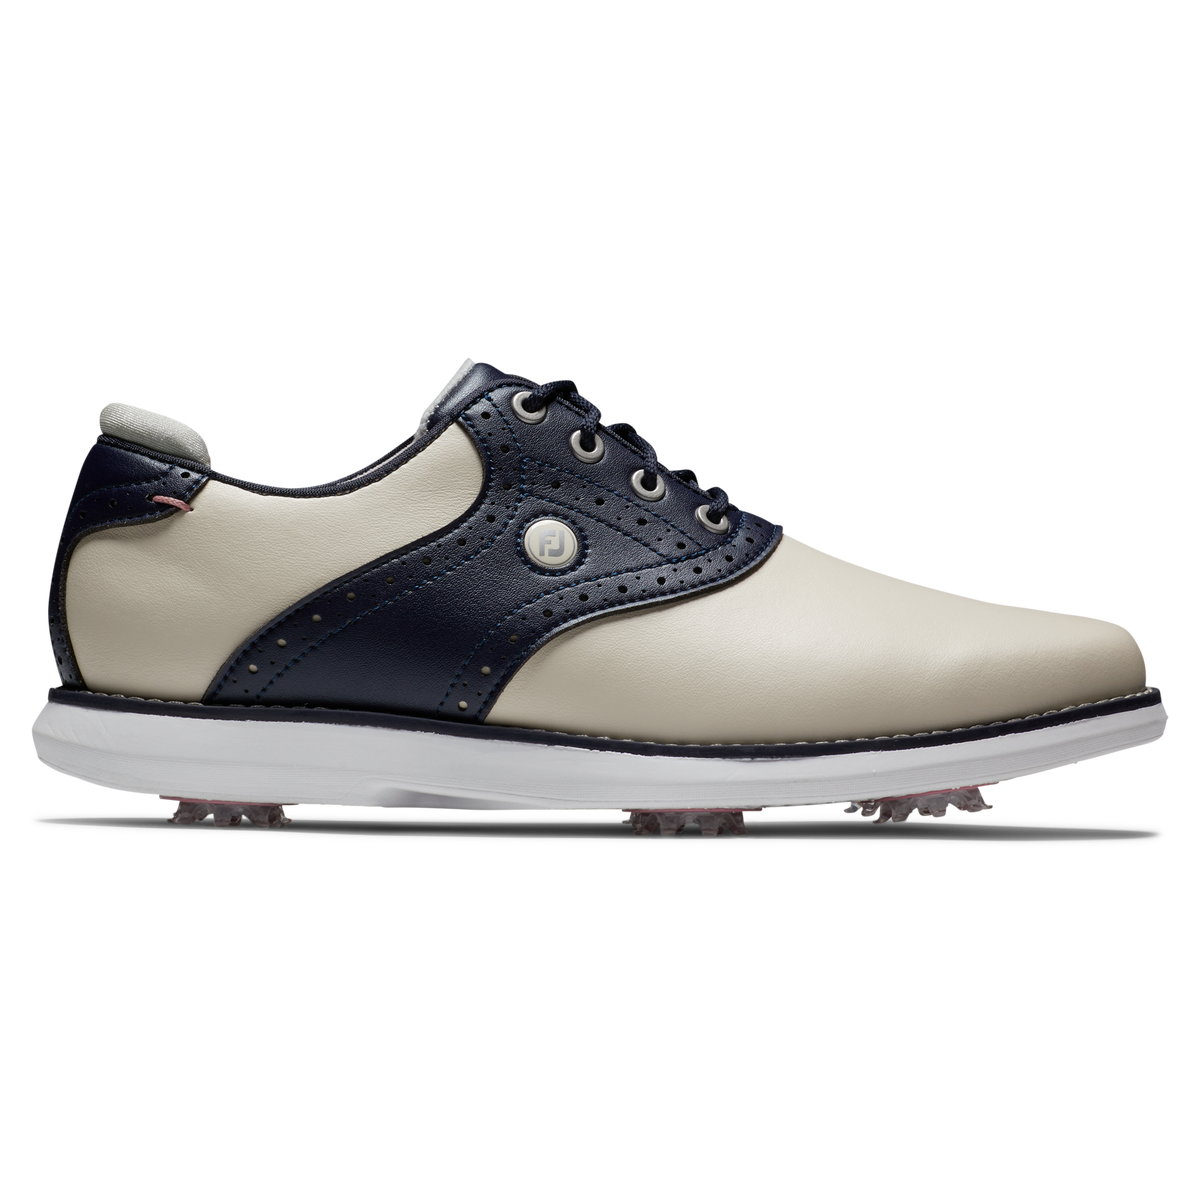 Synthetic Leather Golf Shoe, FJ Traditions Women's